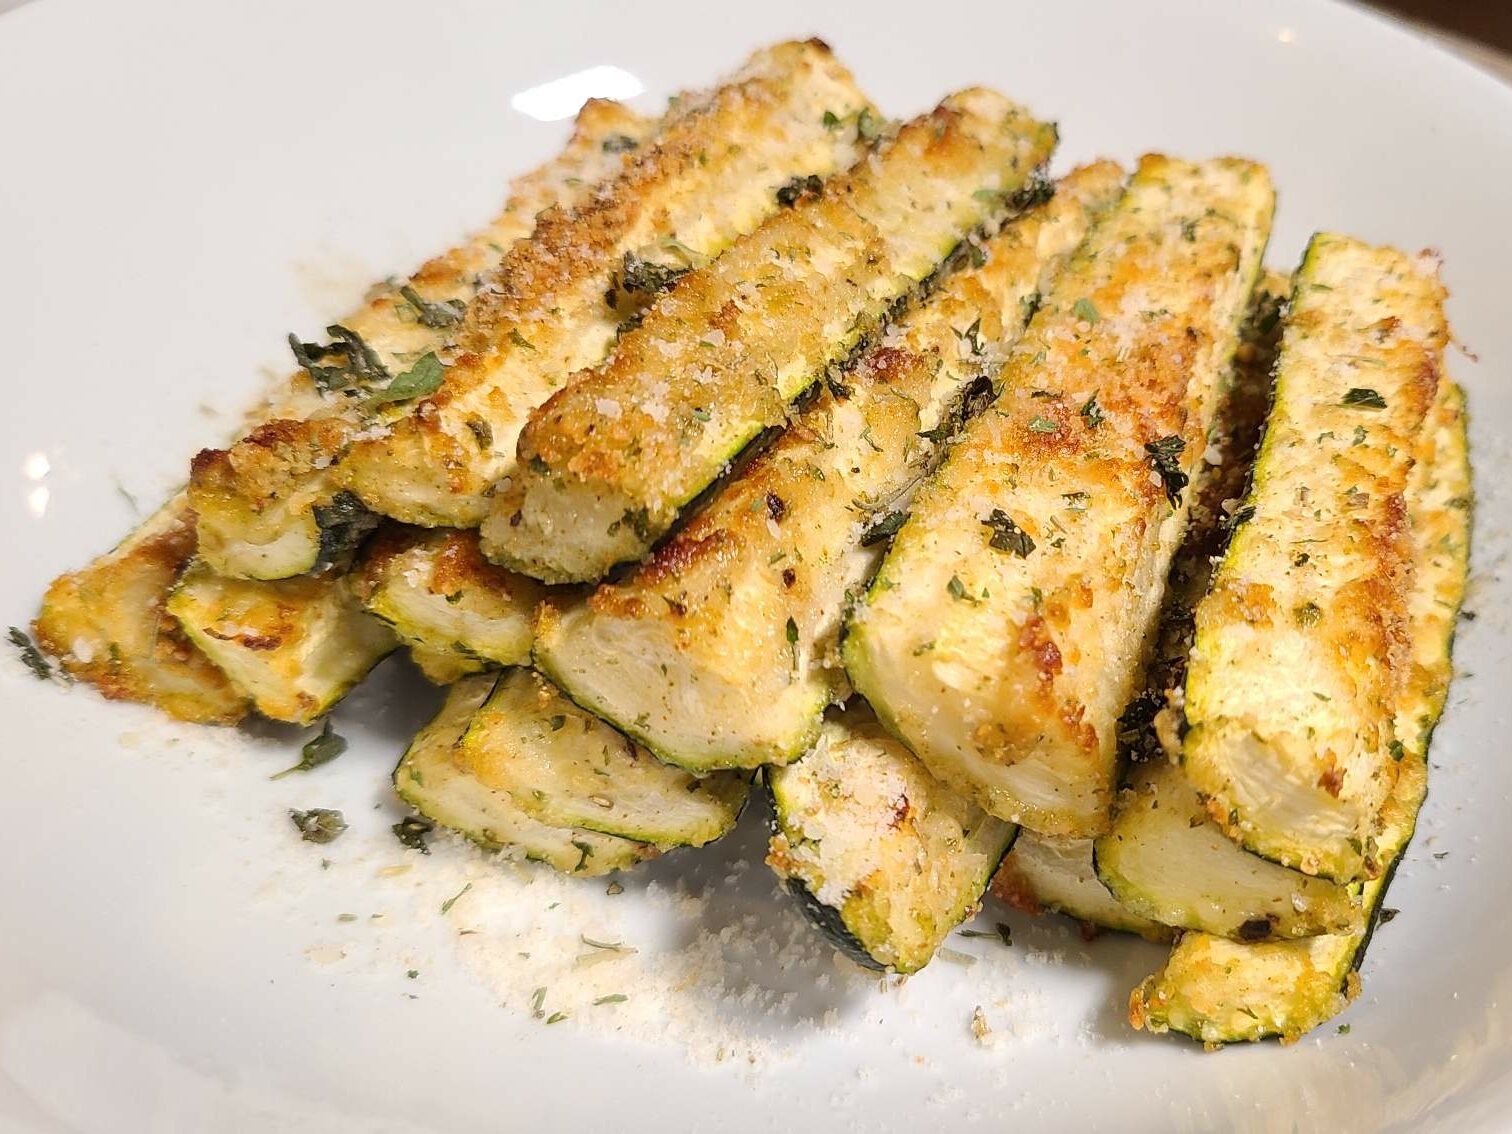 af5Baked-Parmesan-Zucchini-fries-recipe--e1627059058651